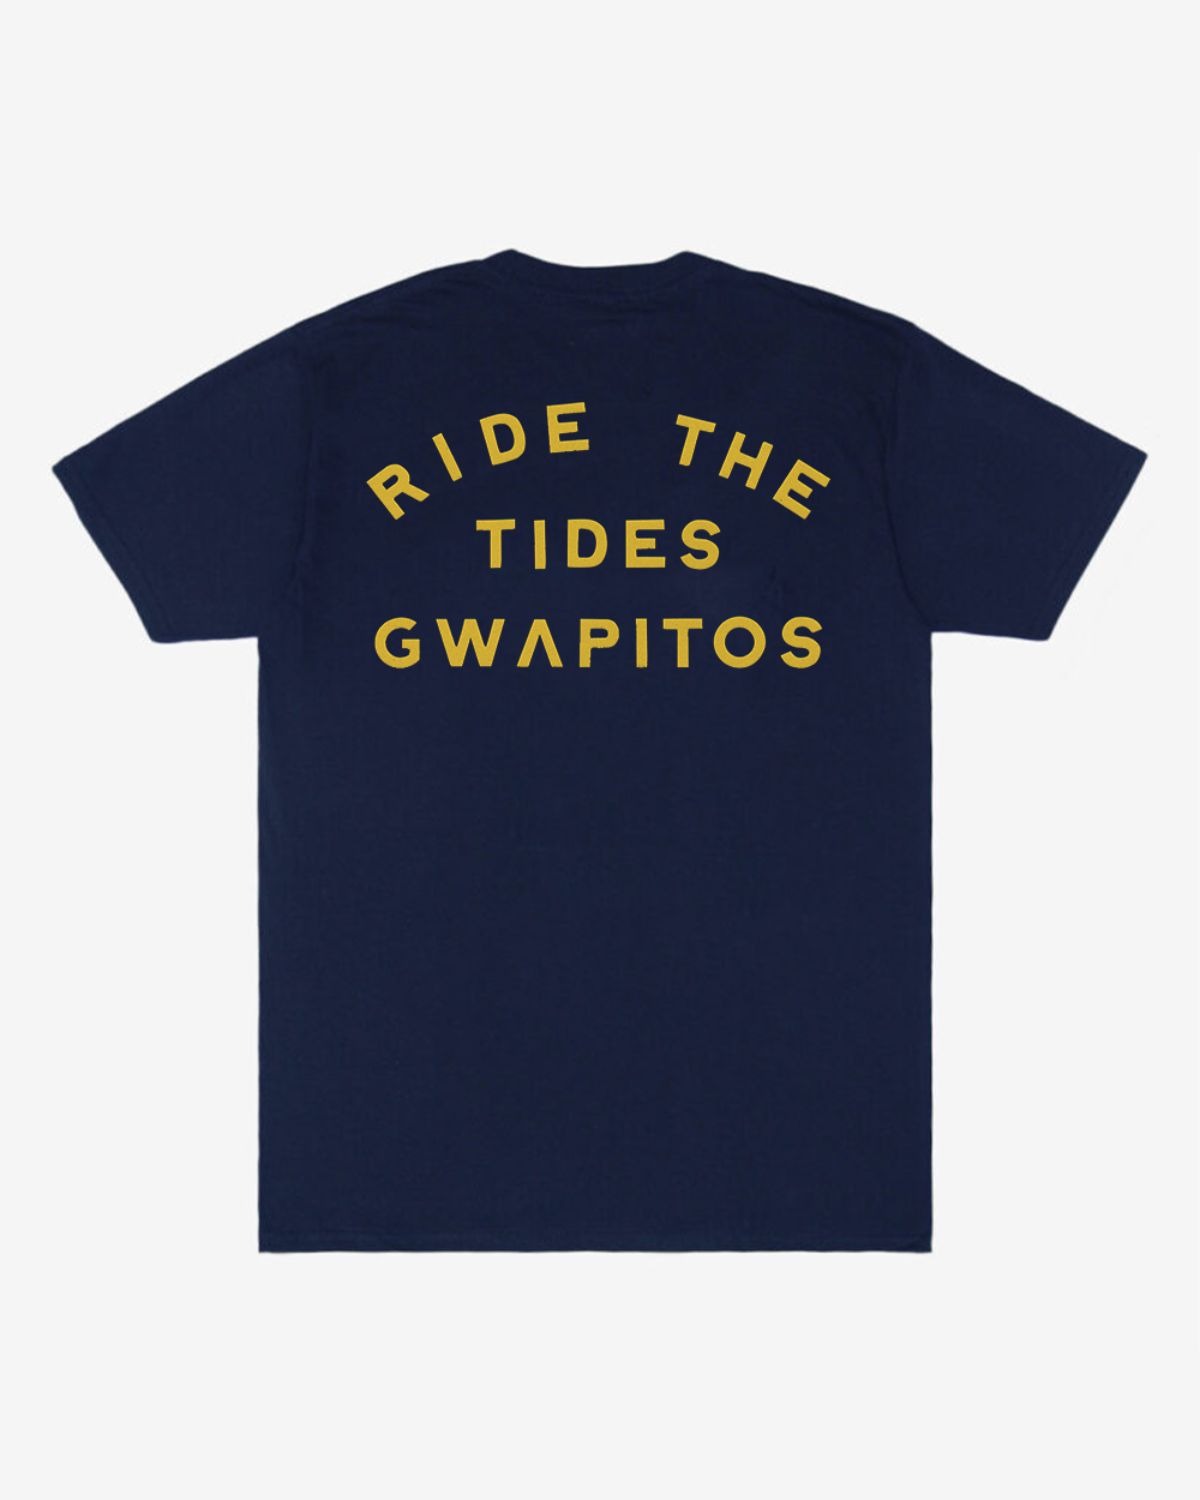 Ride the Tides Tee